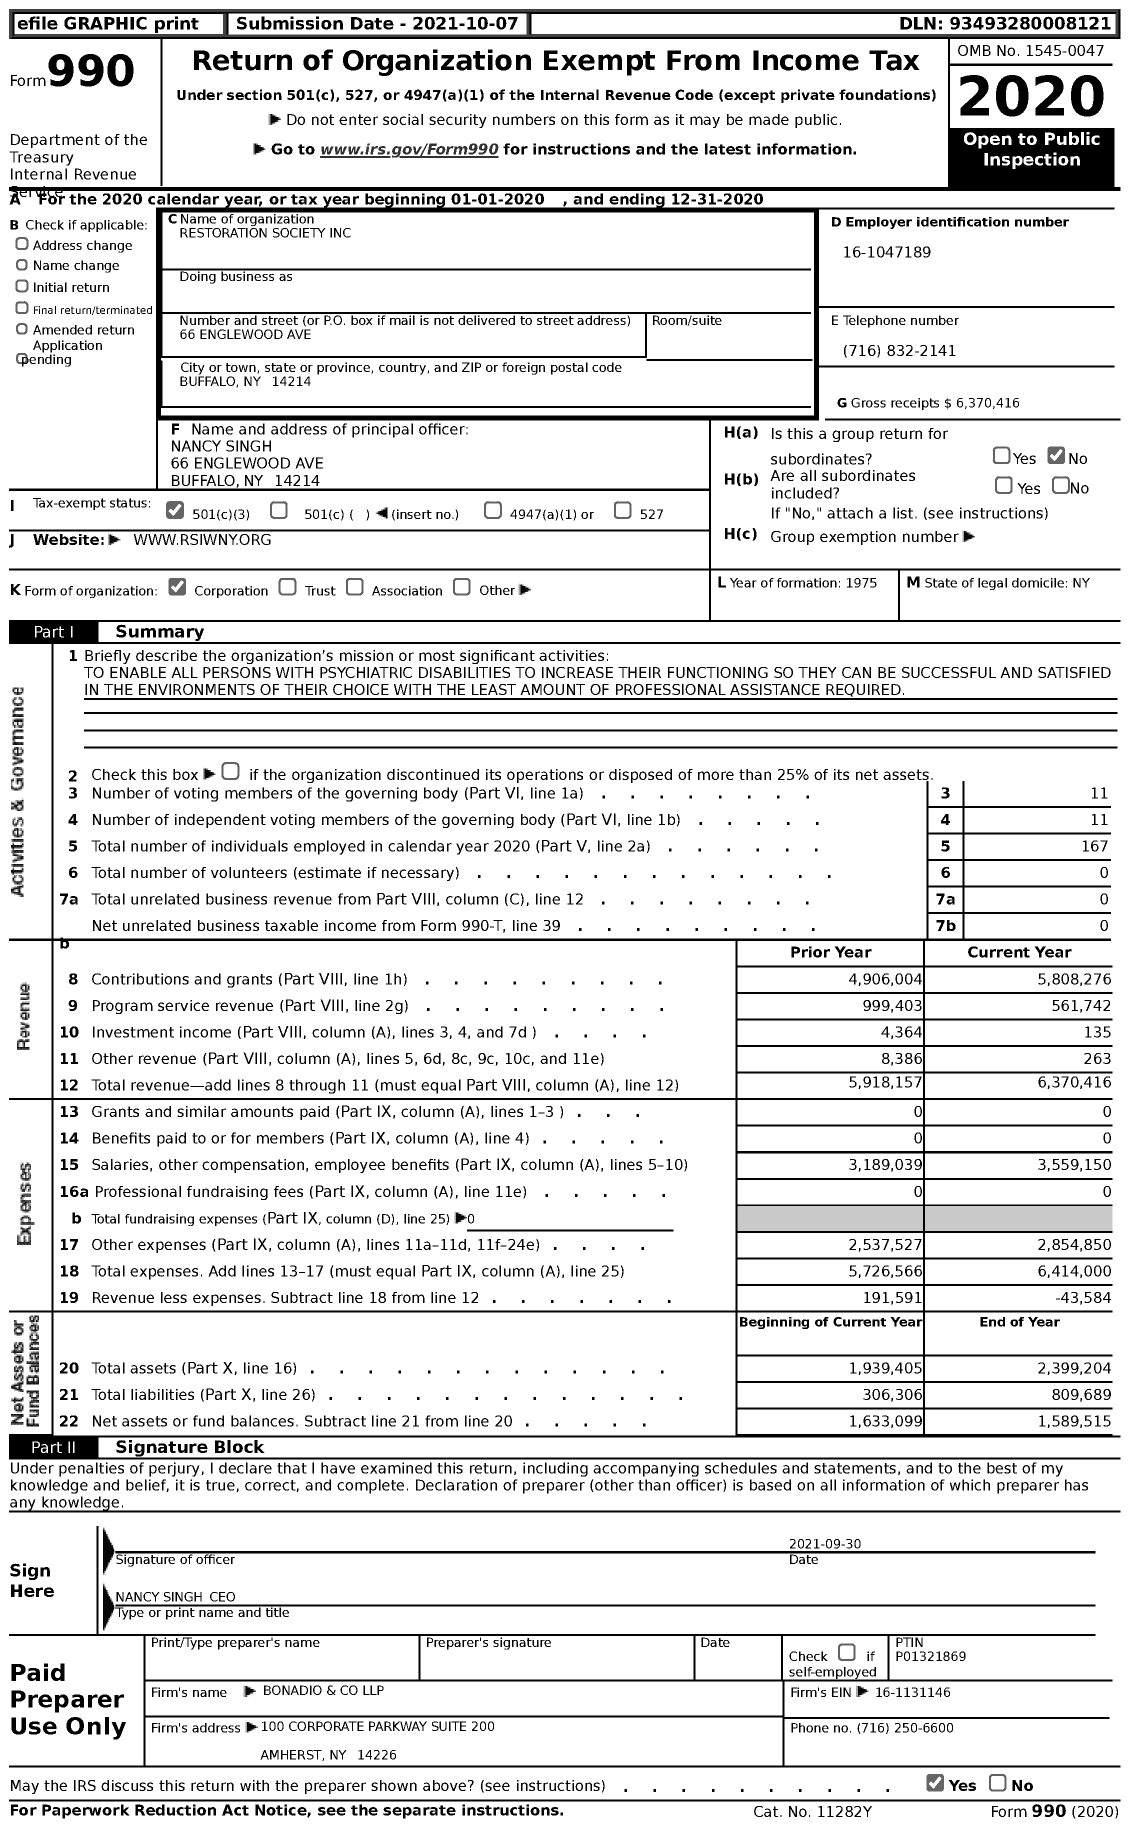 Image of first page of 2020 Form 990 for Restoration Society Incorporated (RSI)